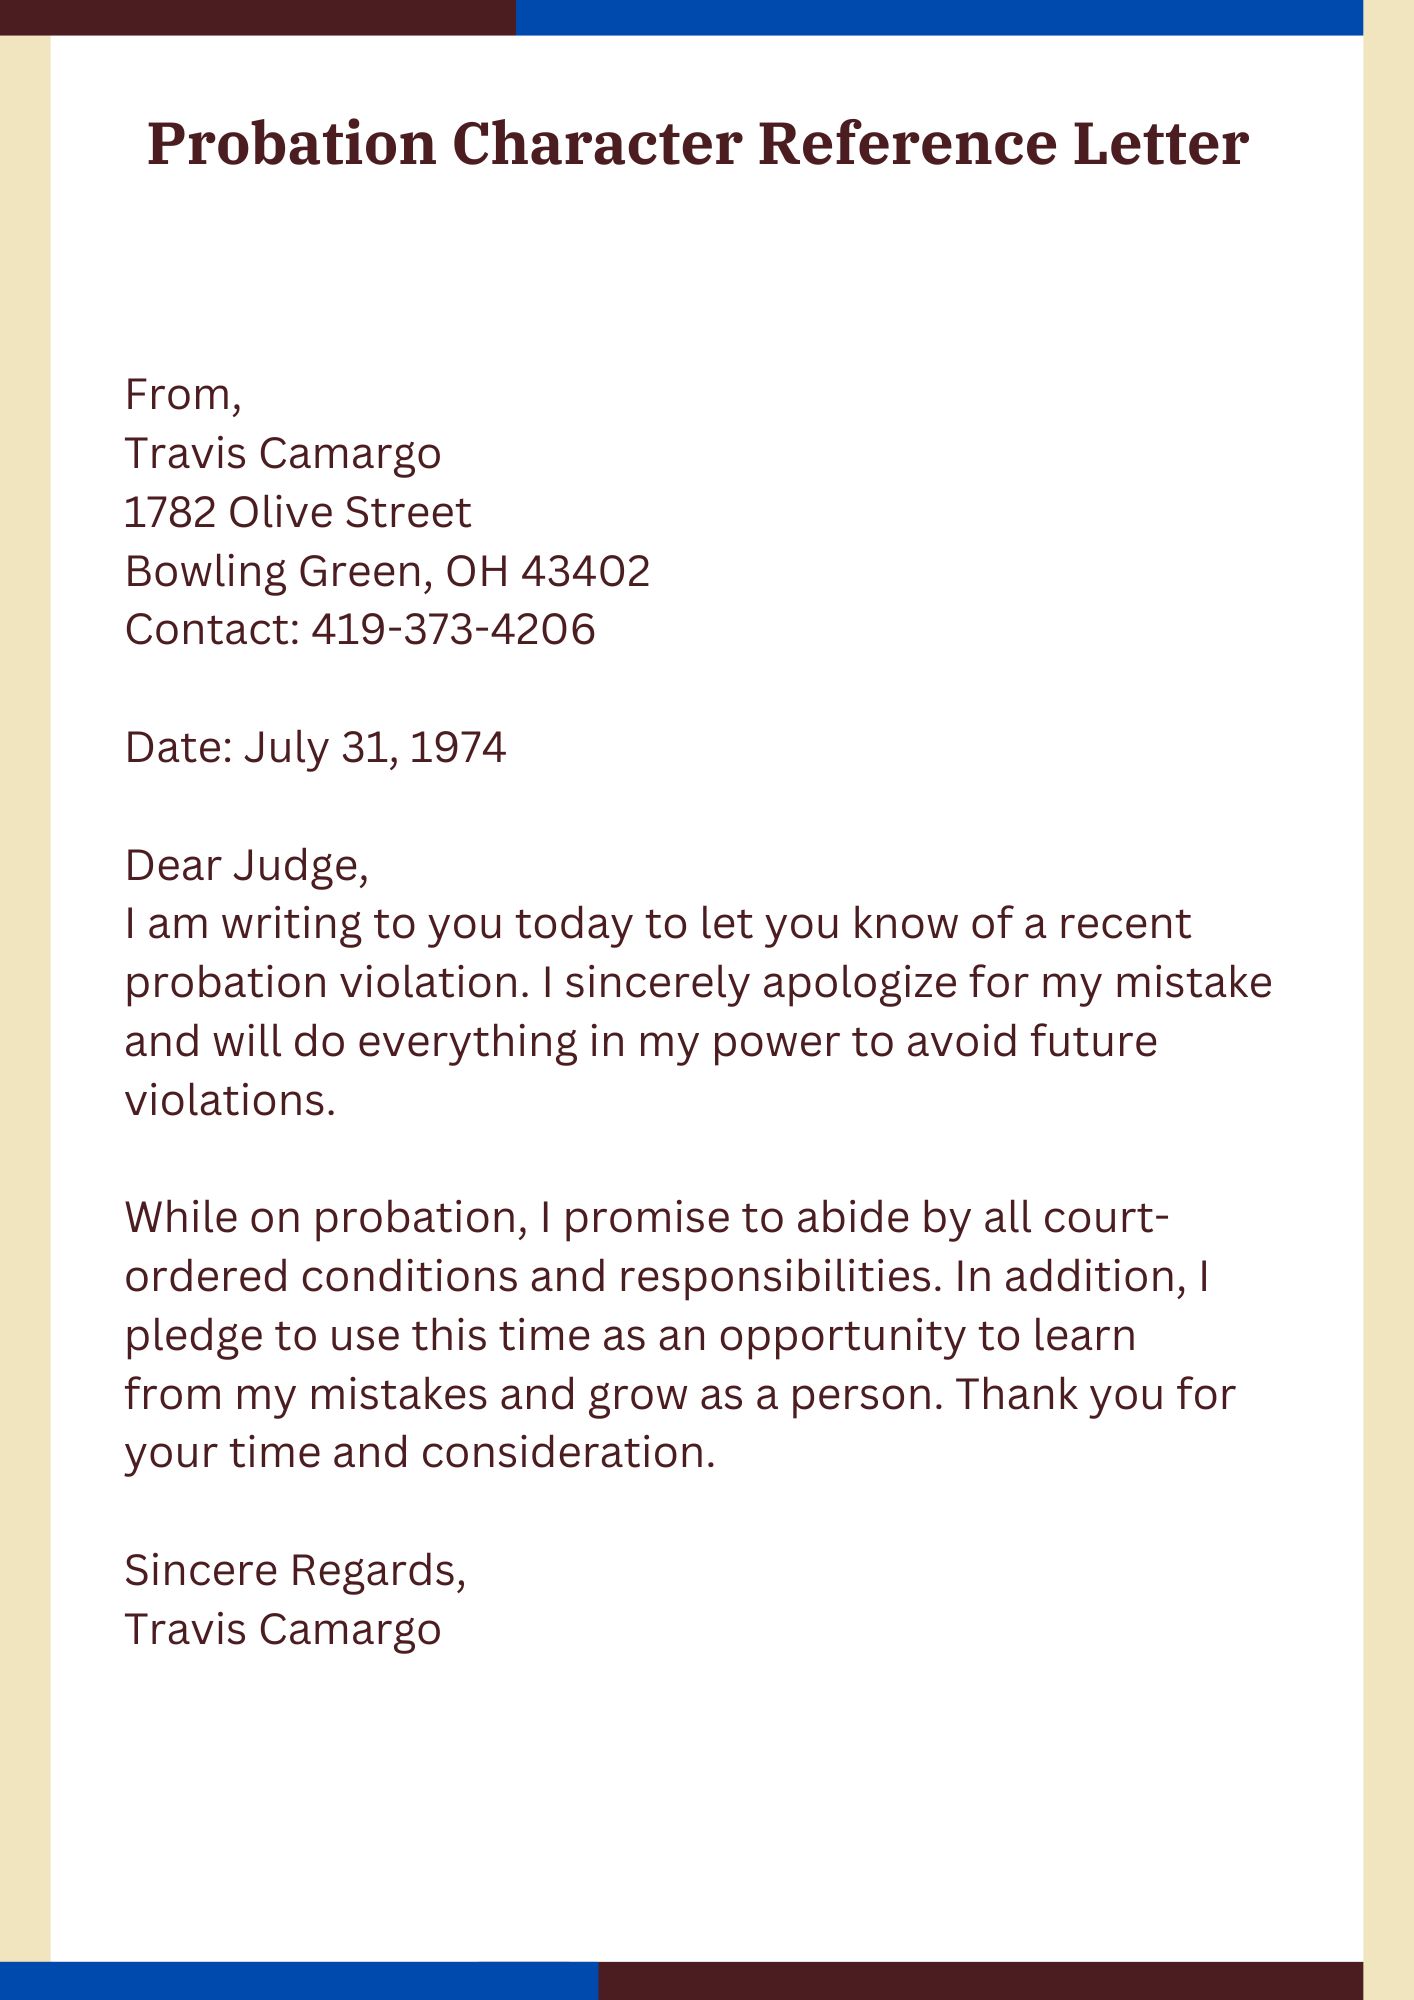 Character Reference Letter For Early Termination Of Probation 